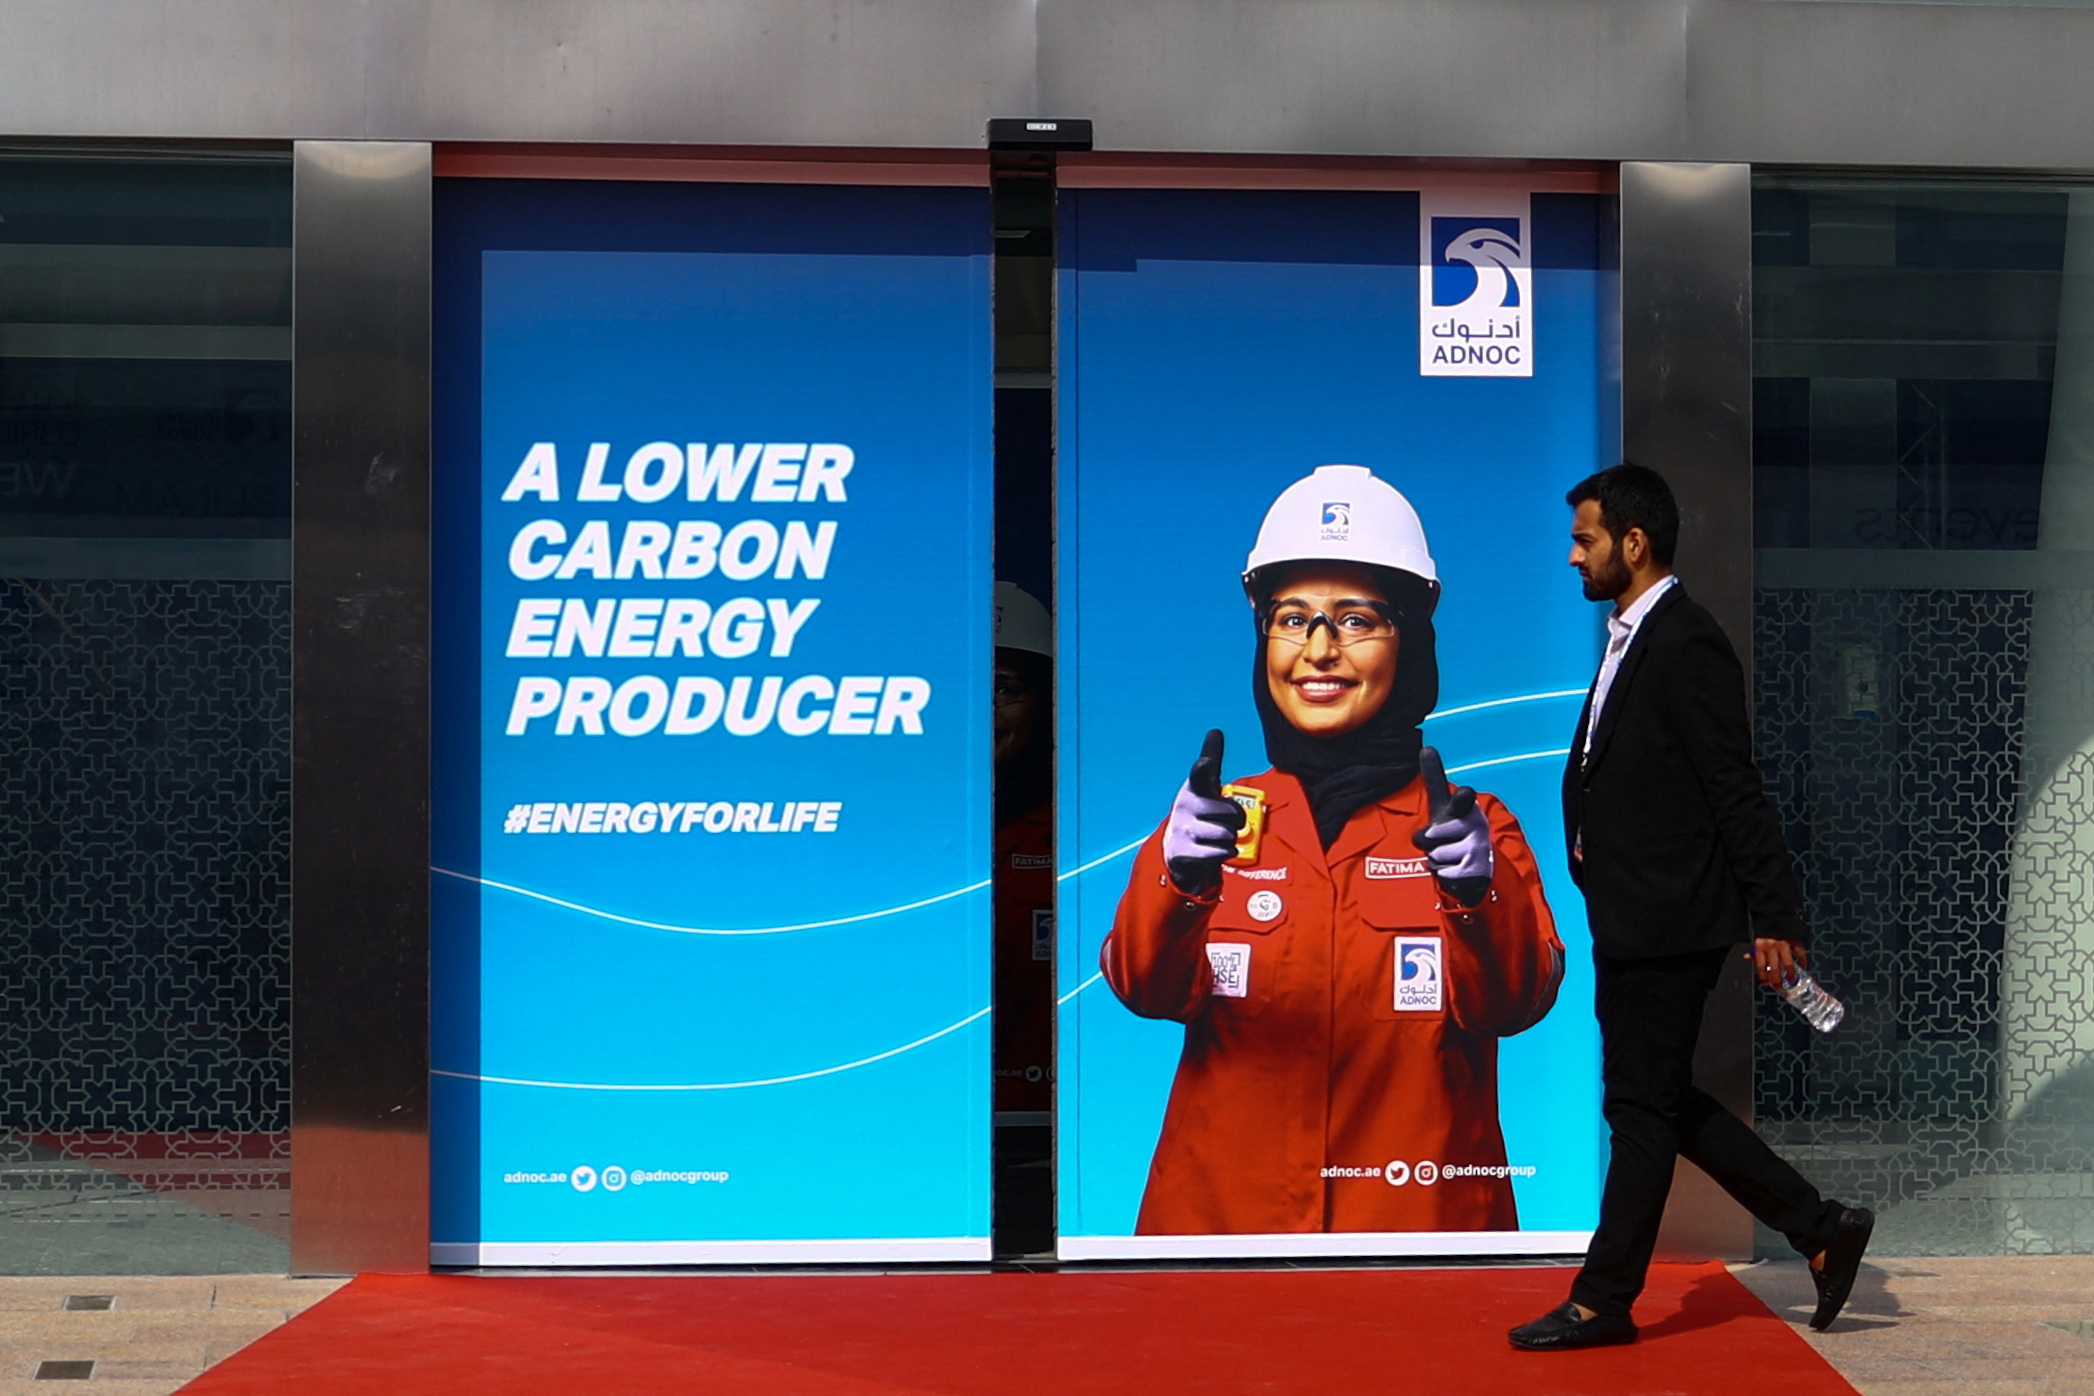 A person walks past a Abu Dhabi National Oil Company (ADNOC) poster during the Abu Dhabi International Petroleum Exhibition and Conference (ADIPEC) in Abu Dhabi